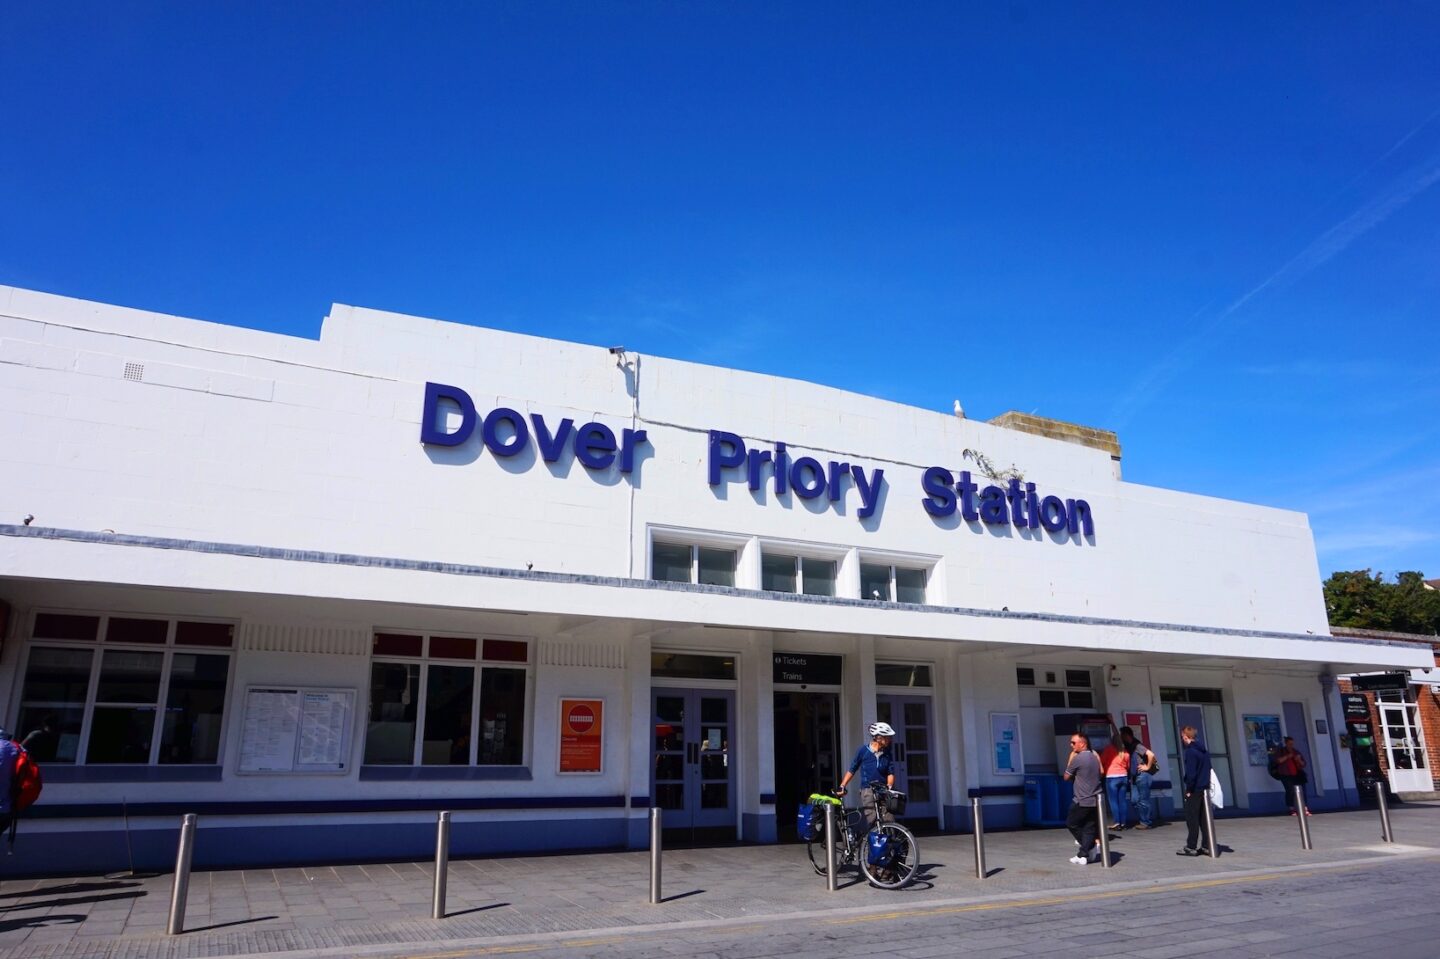 white cliffs of dover from London, Dover Priory Train Station 